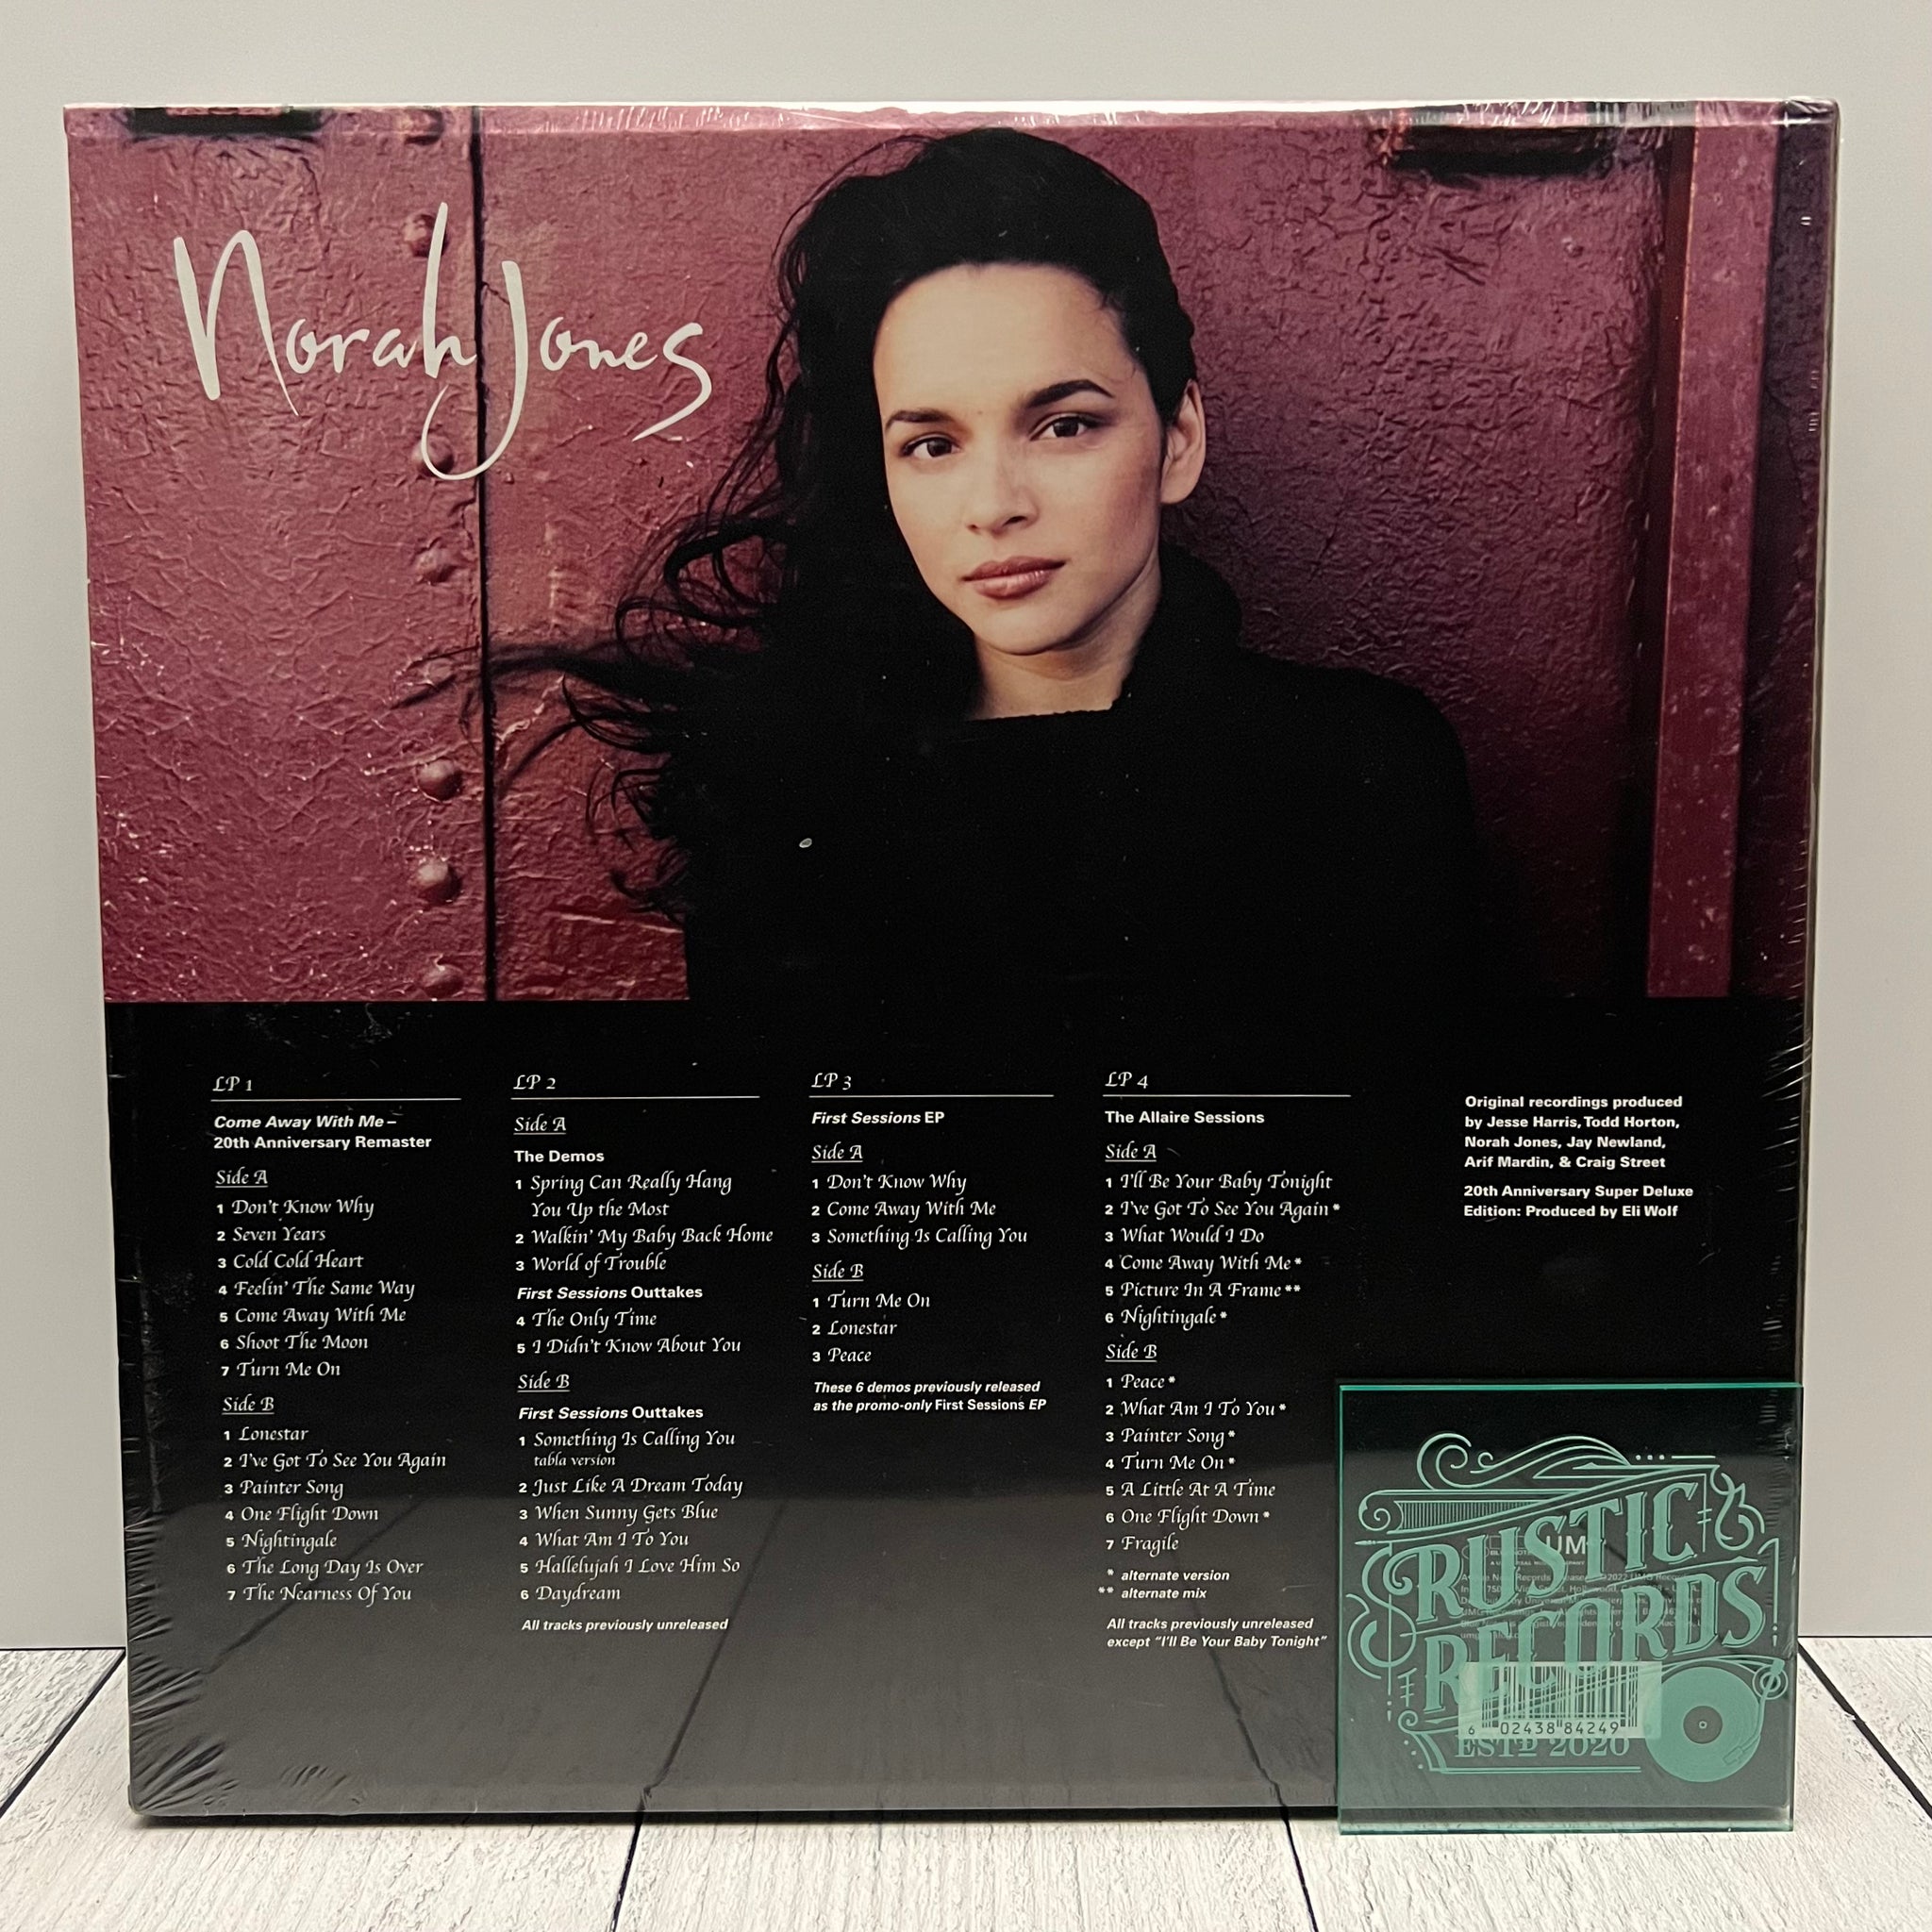 Norah Jones - Come Away With Me 20th Anniversary Super Deluxe Box Set